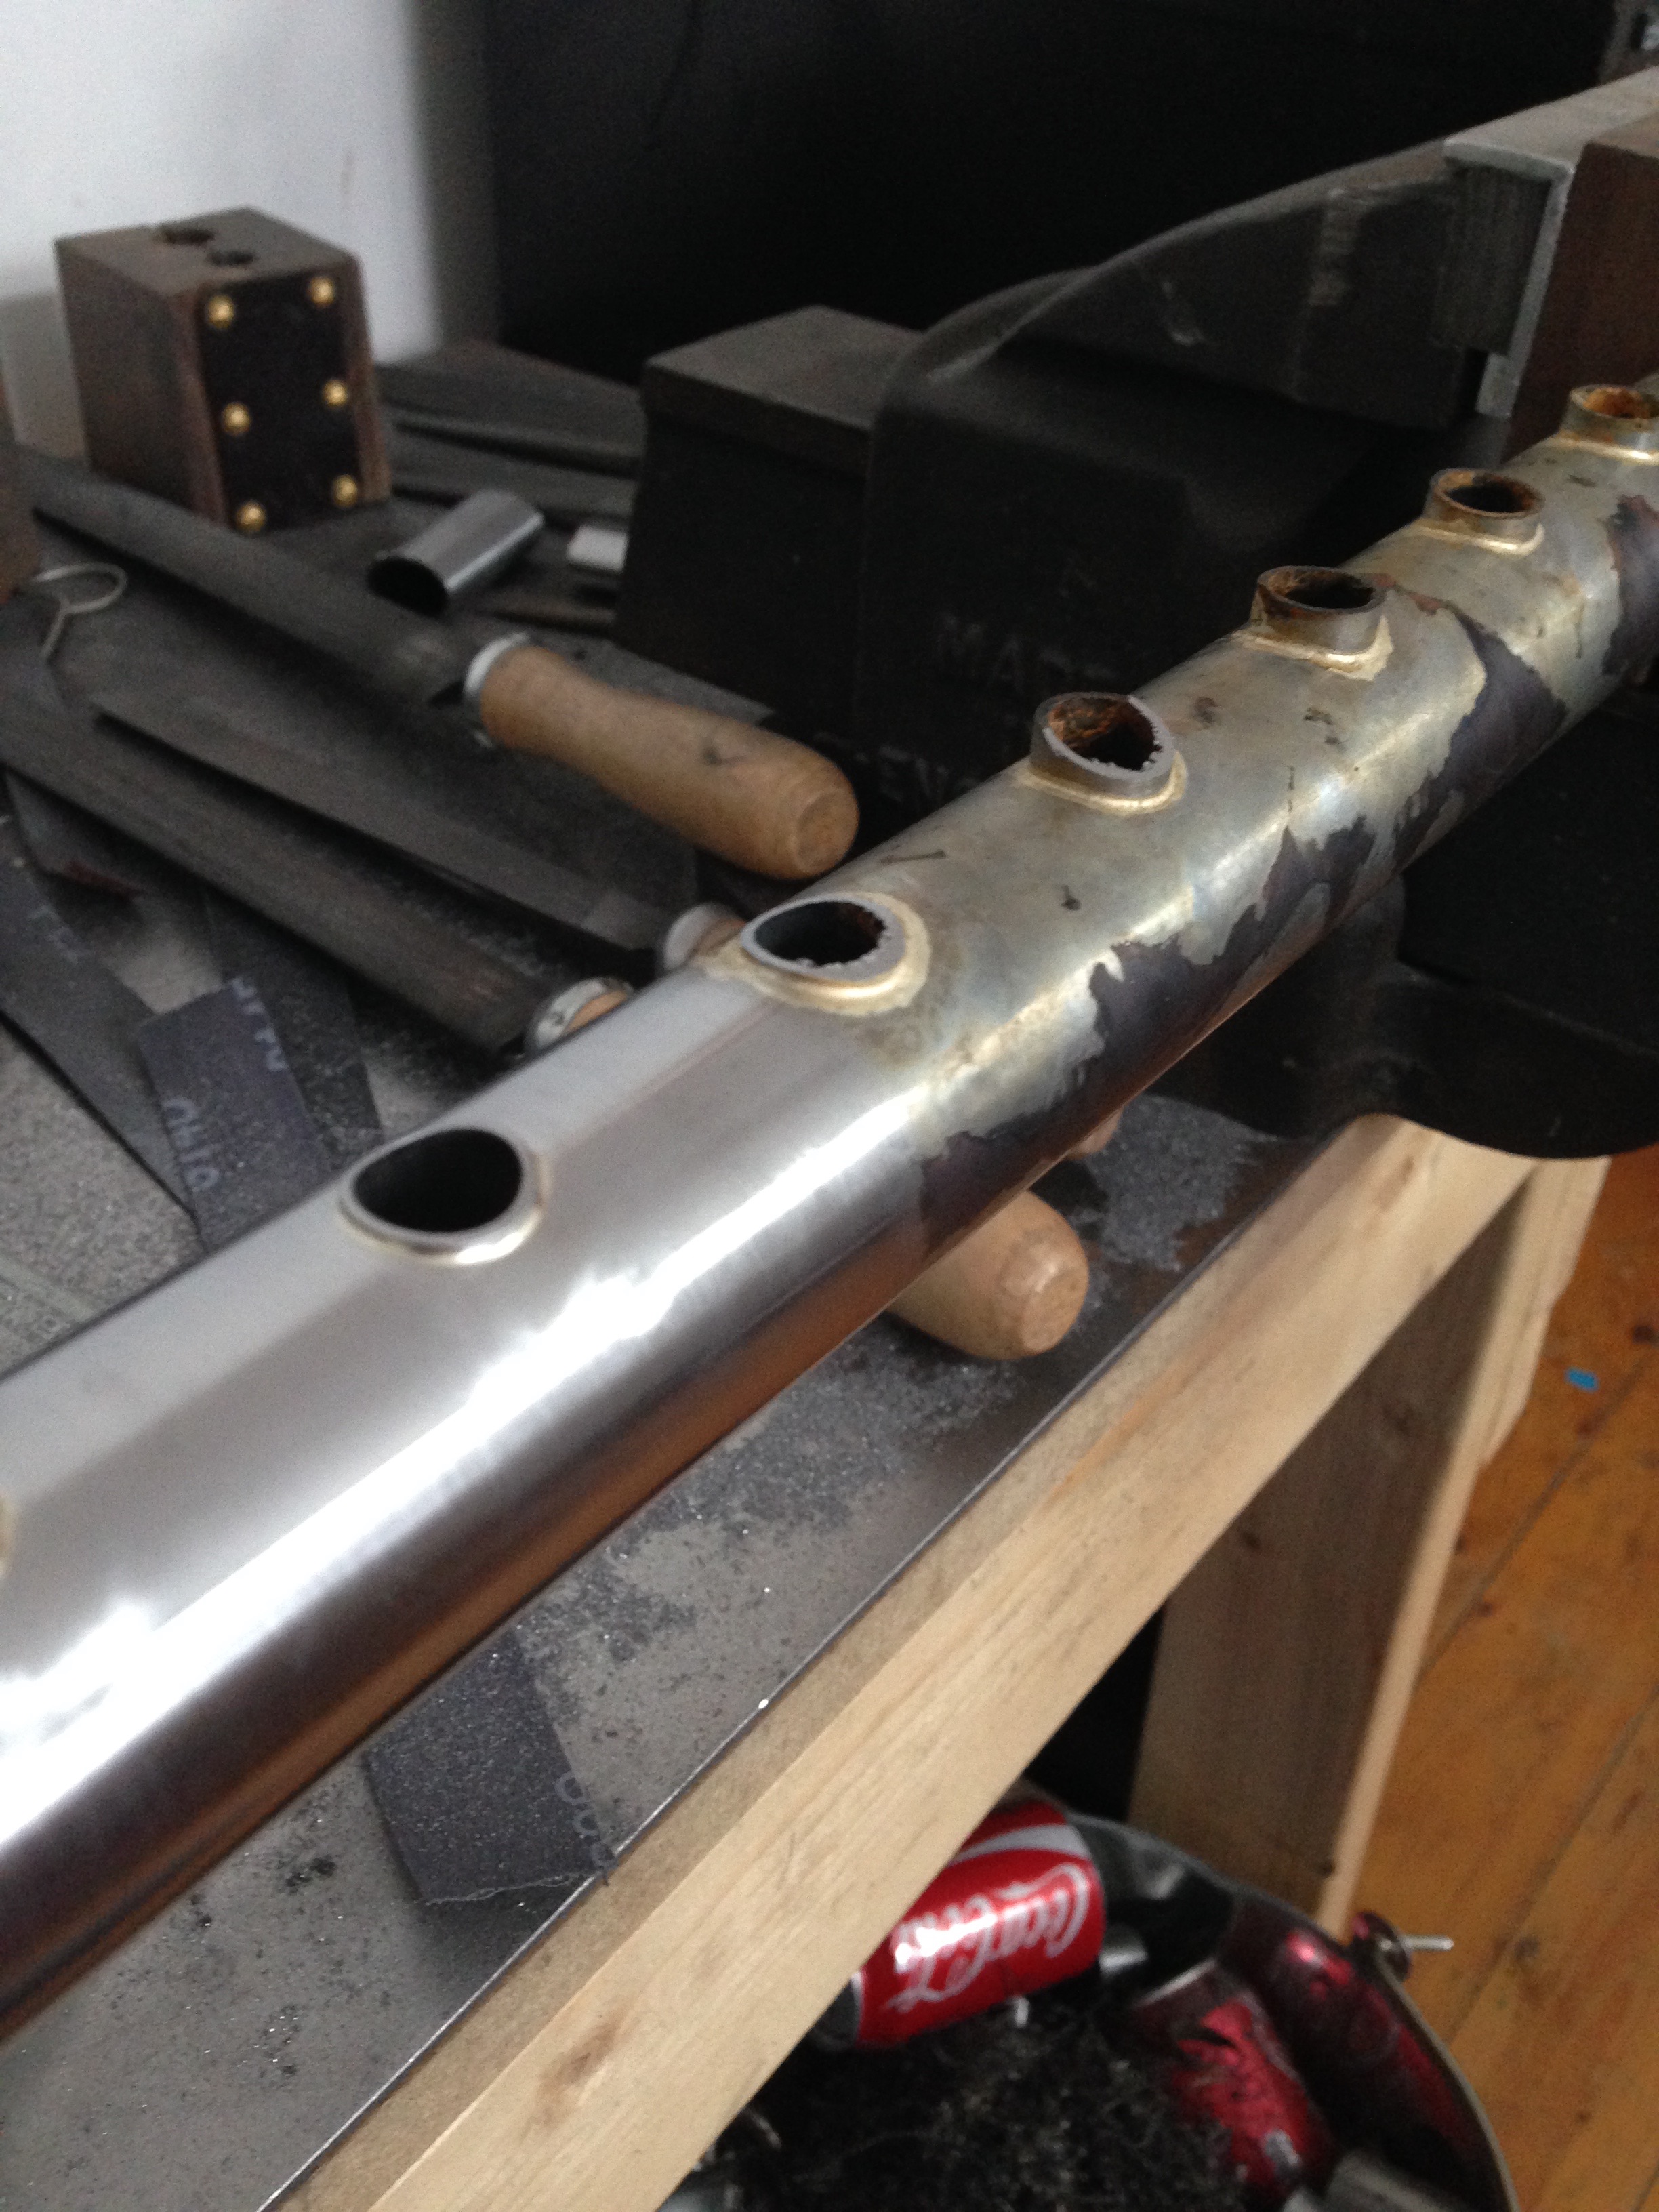  Tube inserts, silvered and then painstakingly filed to meet the contours of the main tube 